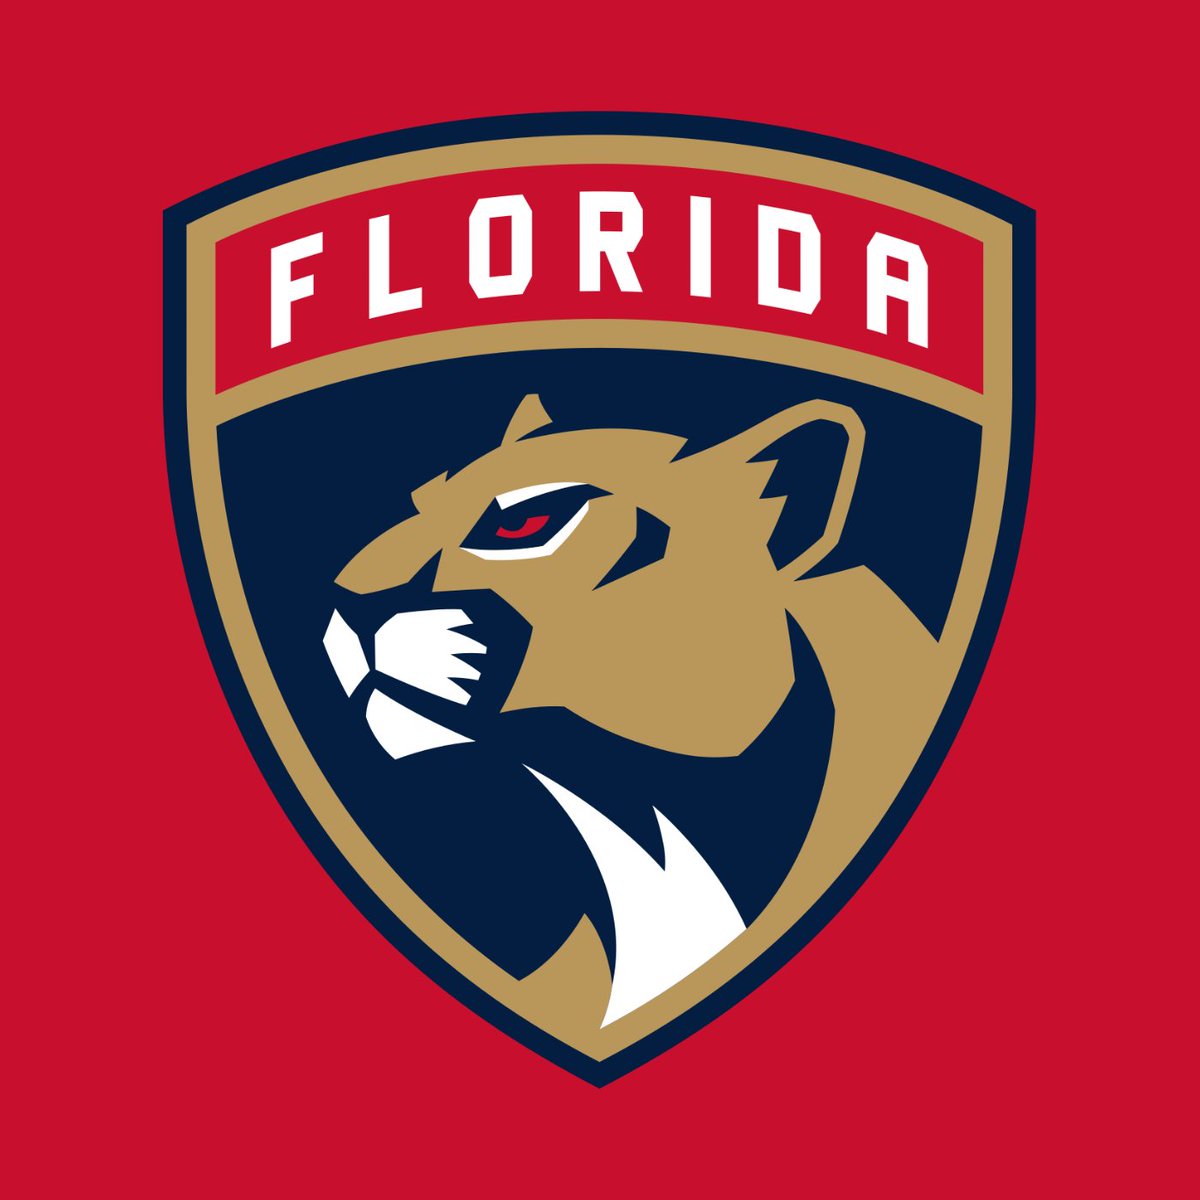 With the 62nd overall selection in the NHL Draft, the Florida Panthers are proud to select: Dora The Explorer. https://t.co/mboO2lwA8K